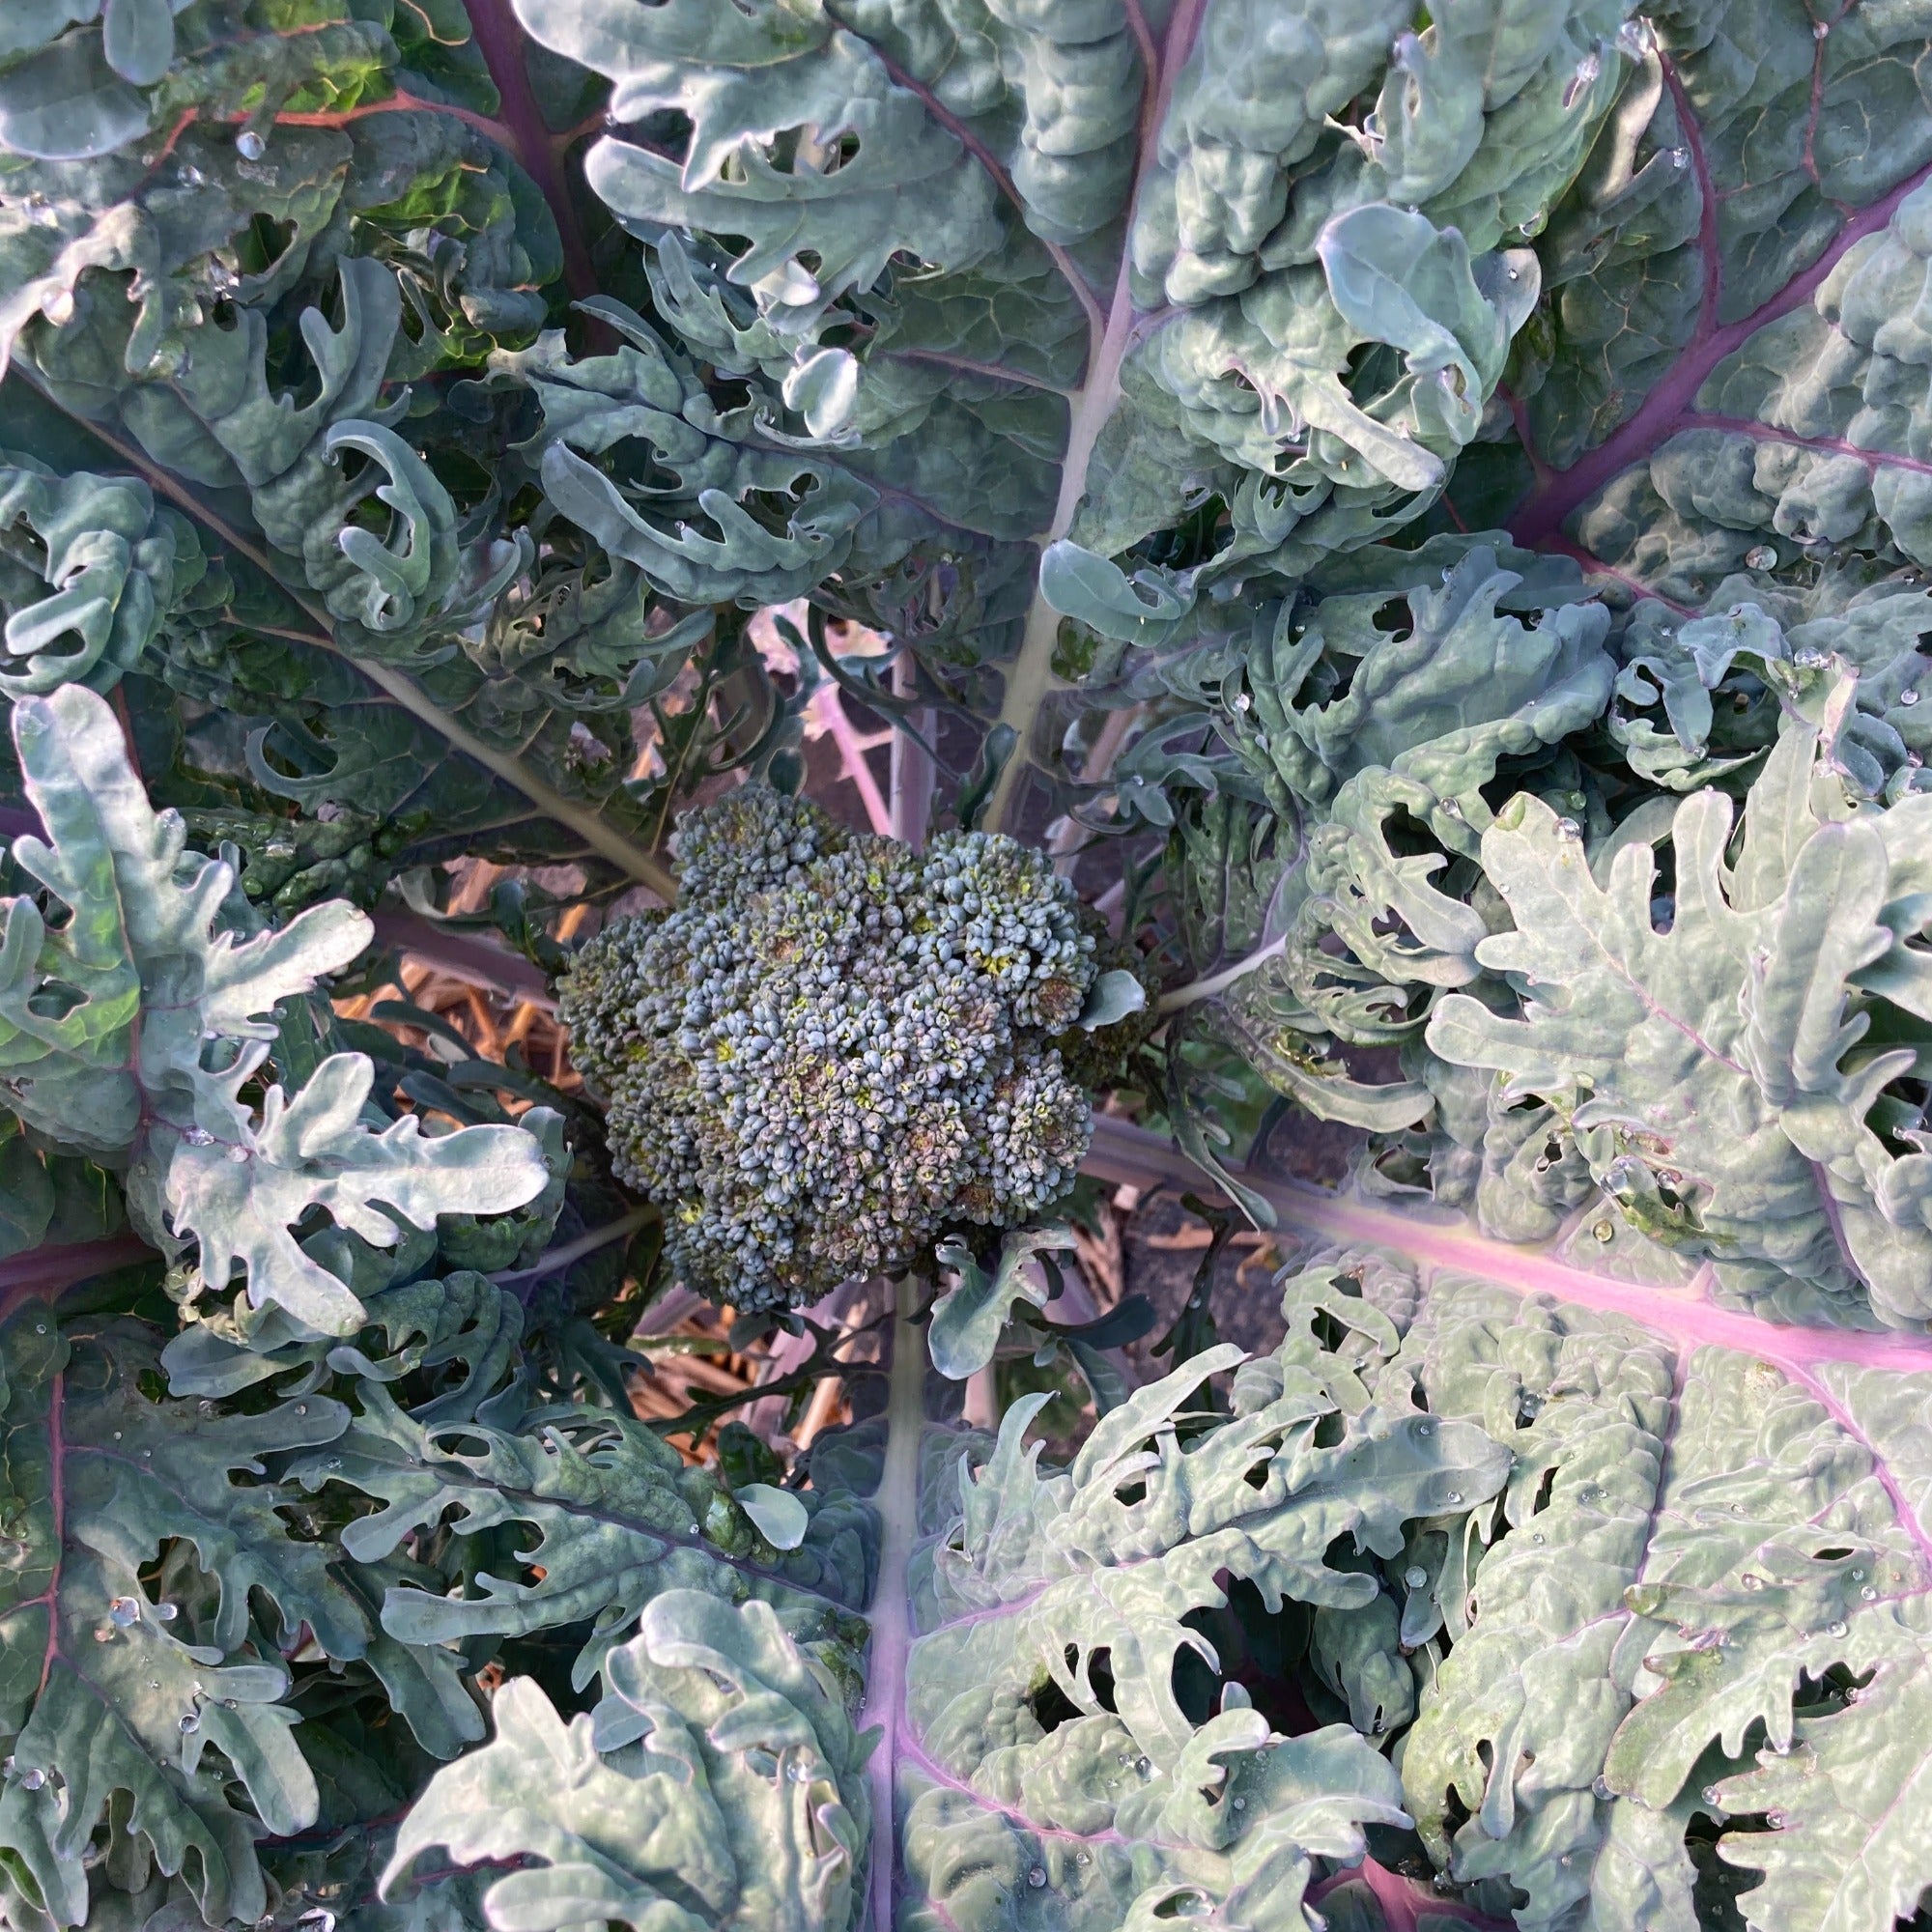 The central floret and rosette of leaves of purple peacock sprouting broccoli showing the leaf quality